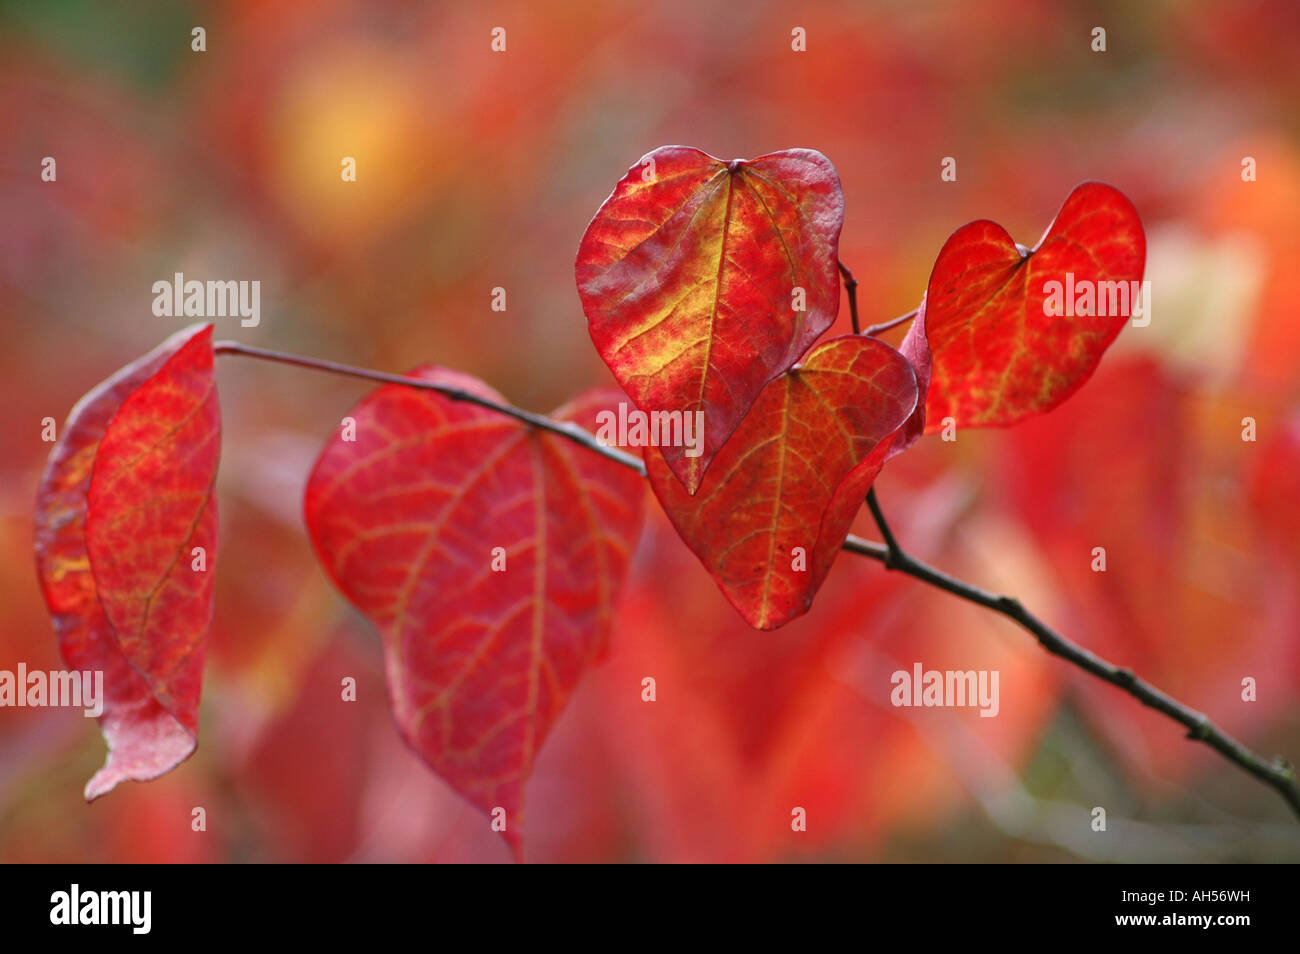 Deciduous hardy garden shrub with great autumn foliage colour Reds oranges and golds on the leaves Stock Photo